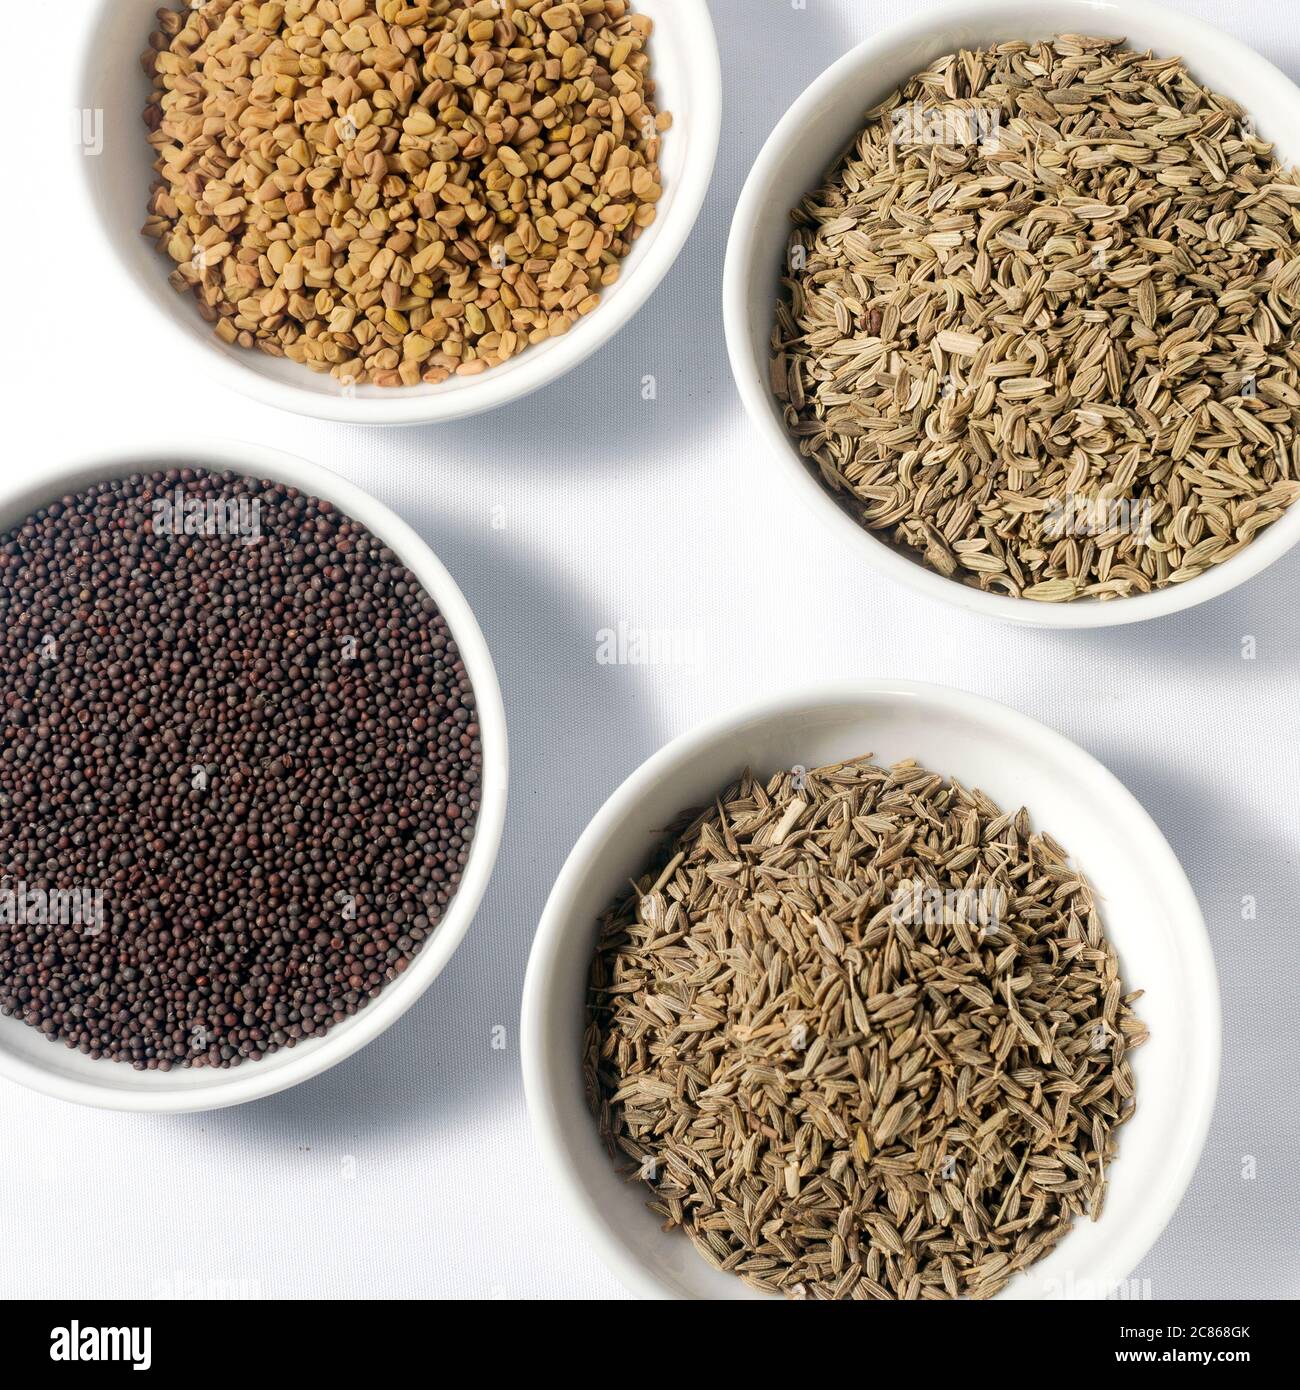 Best of Ceylon Spices; Cumin seeds, Caraway seeds, Mustard seeds, Fenugreek seeds in bowls. Isolated on white background Stock Photo